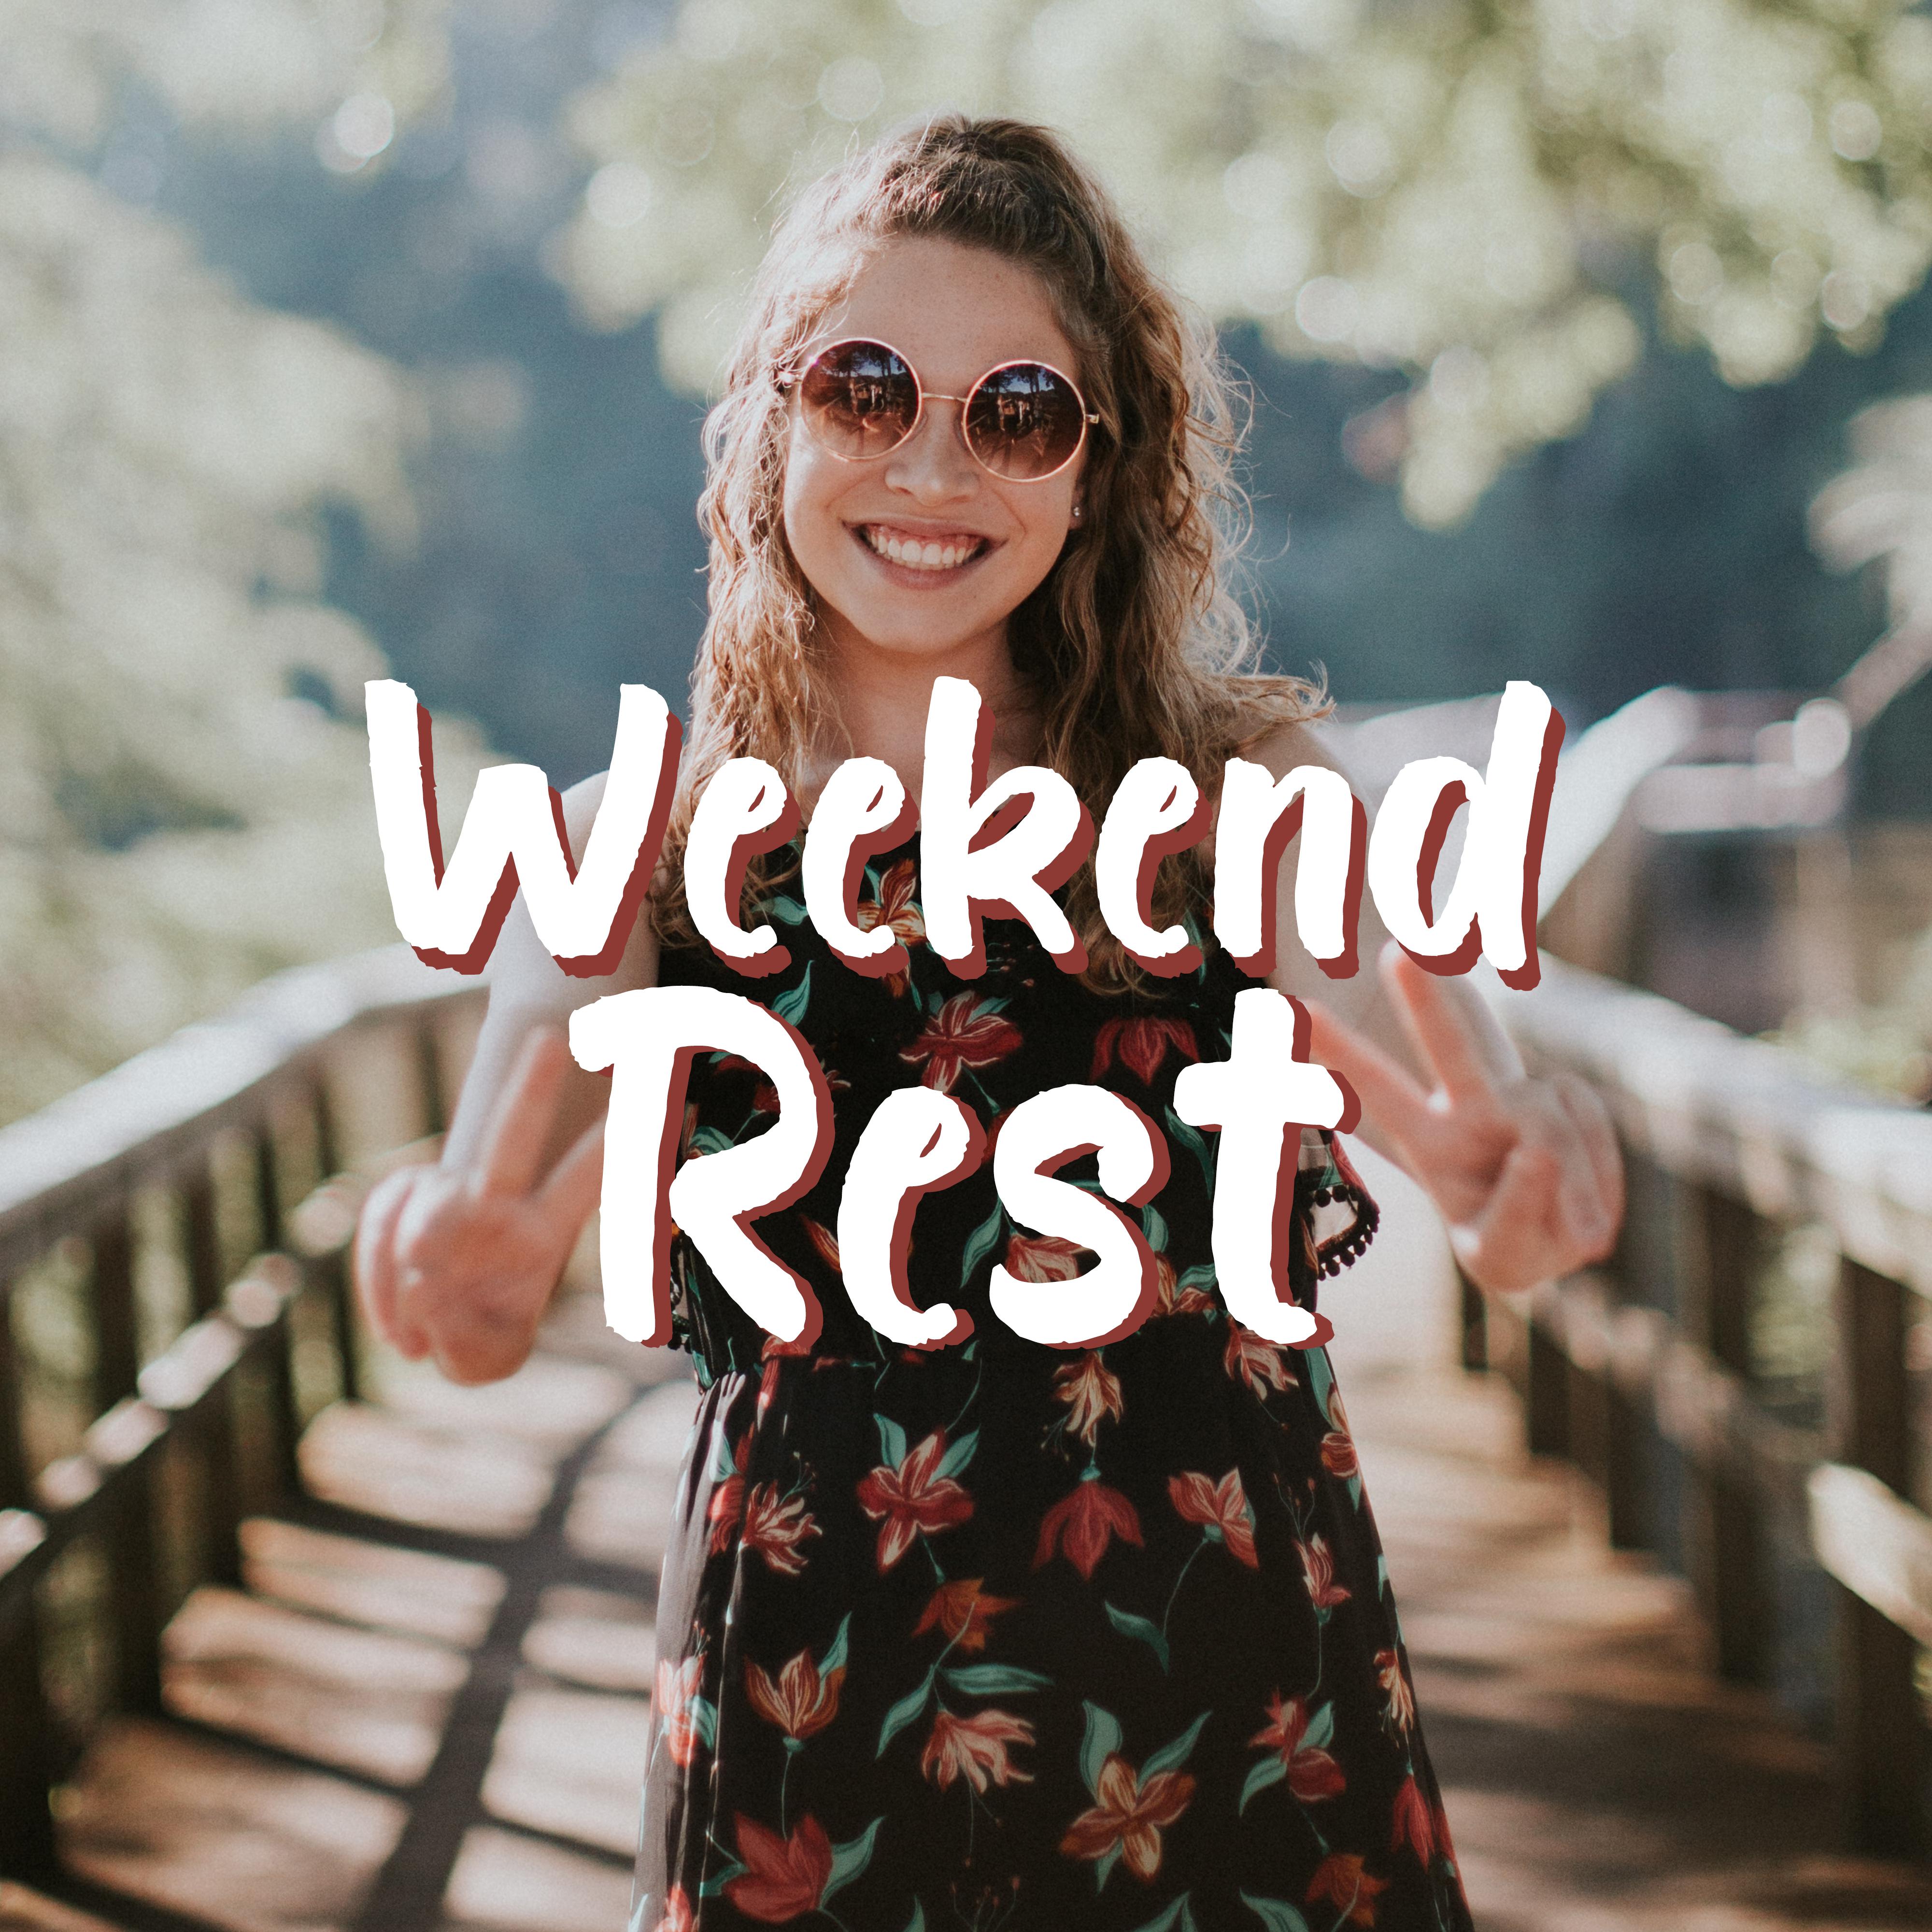 Weekend Rest - Music to Relax on Non-Working Days, as Background Music for the Home or on Lazy Afternoons